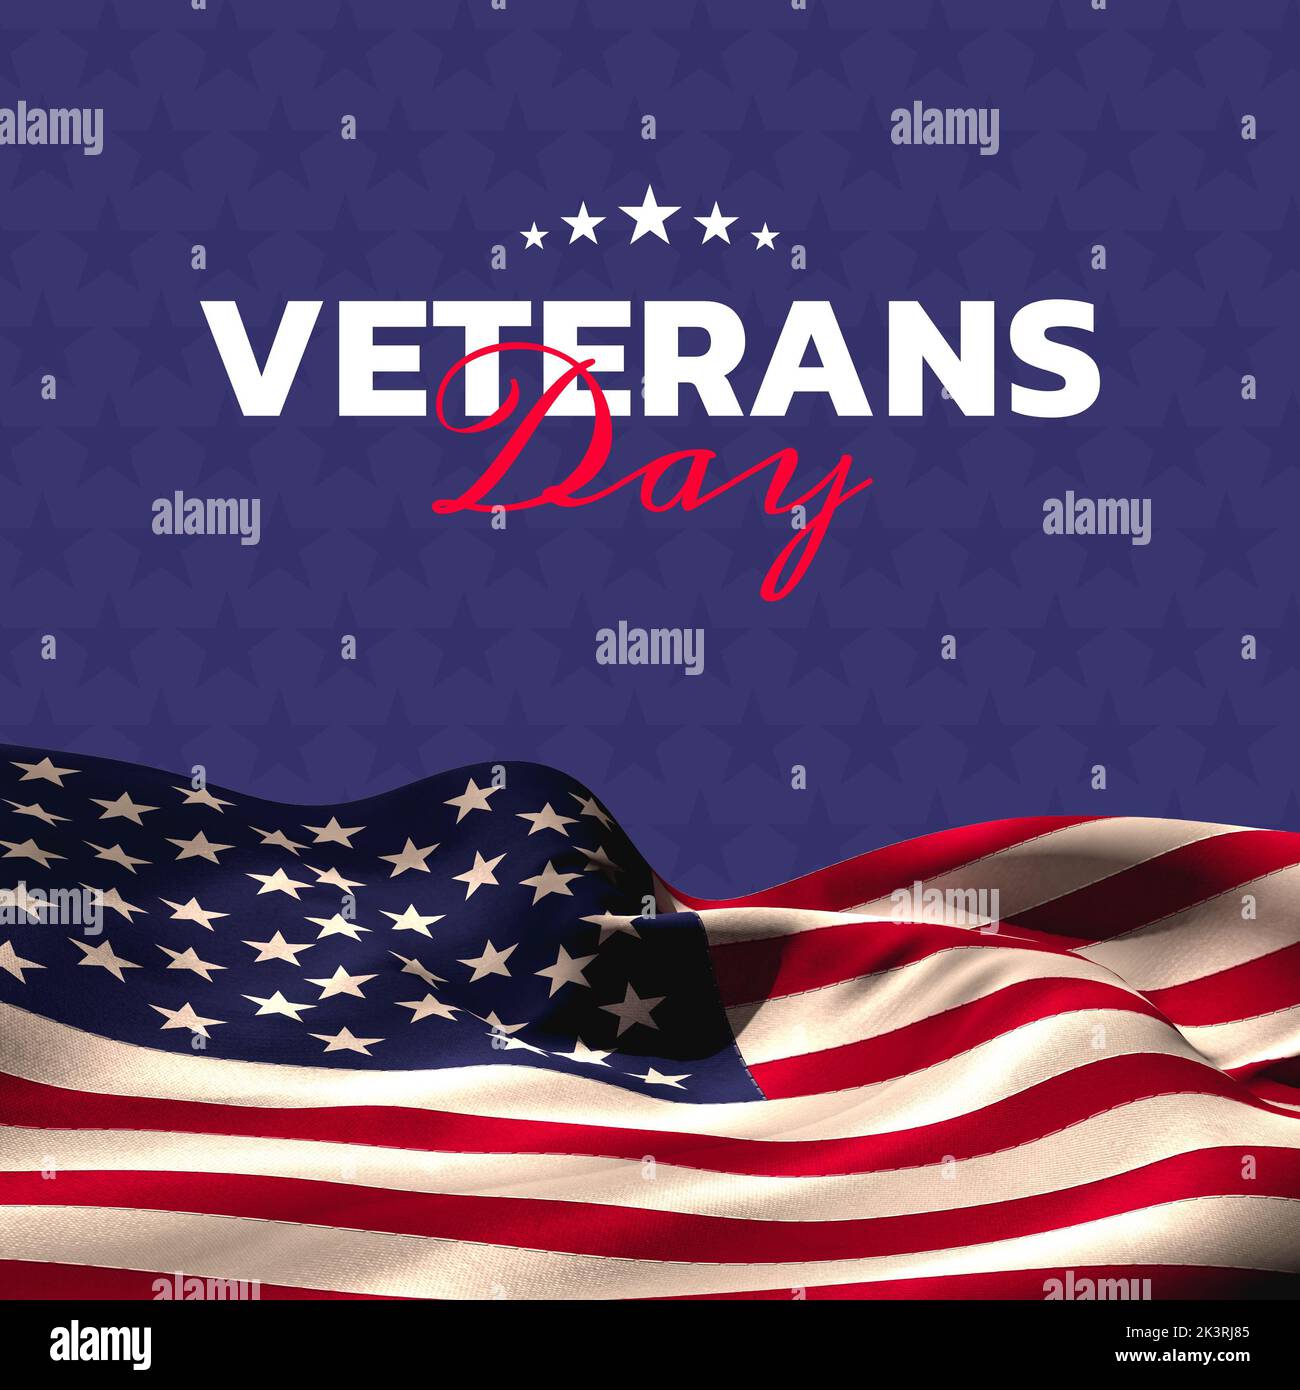 Composition of veterans day text with flag of united states of america Stock Photo